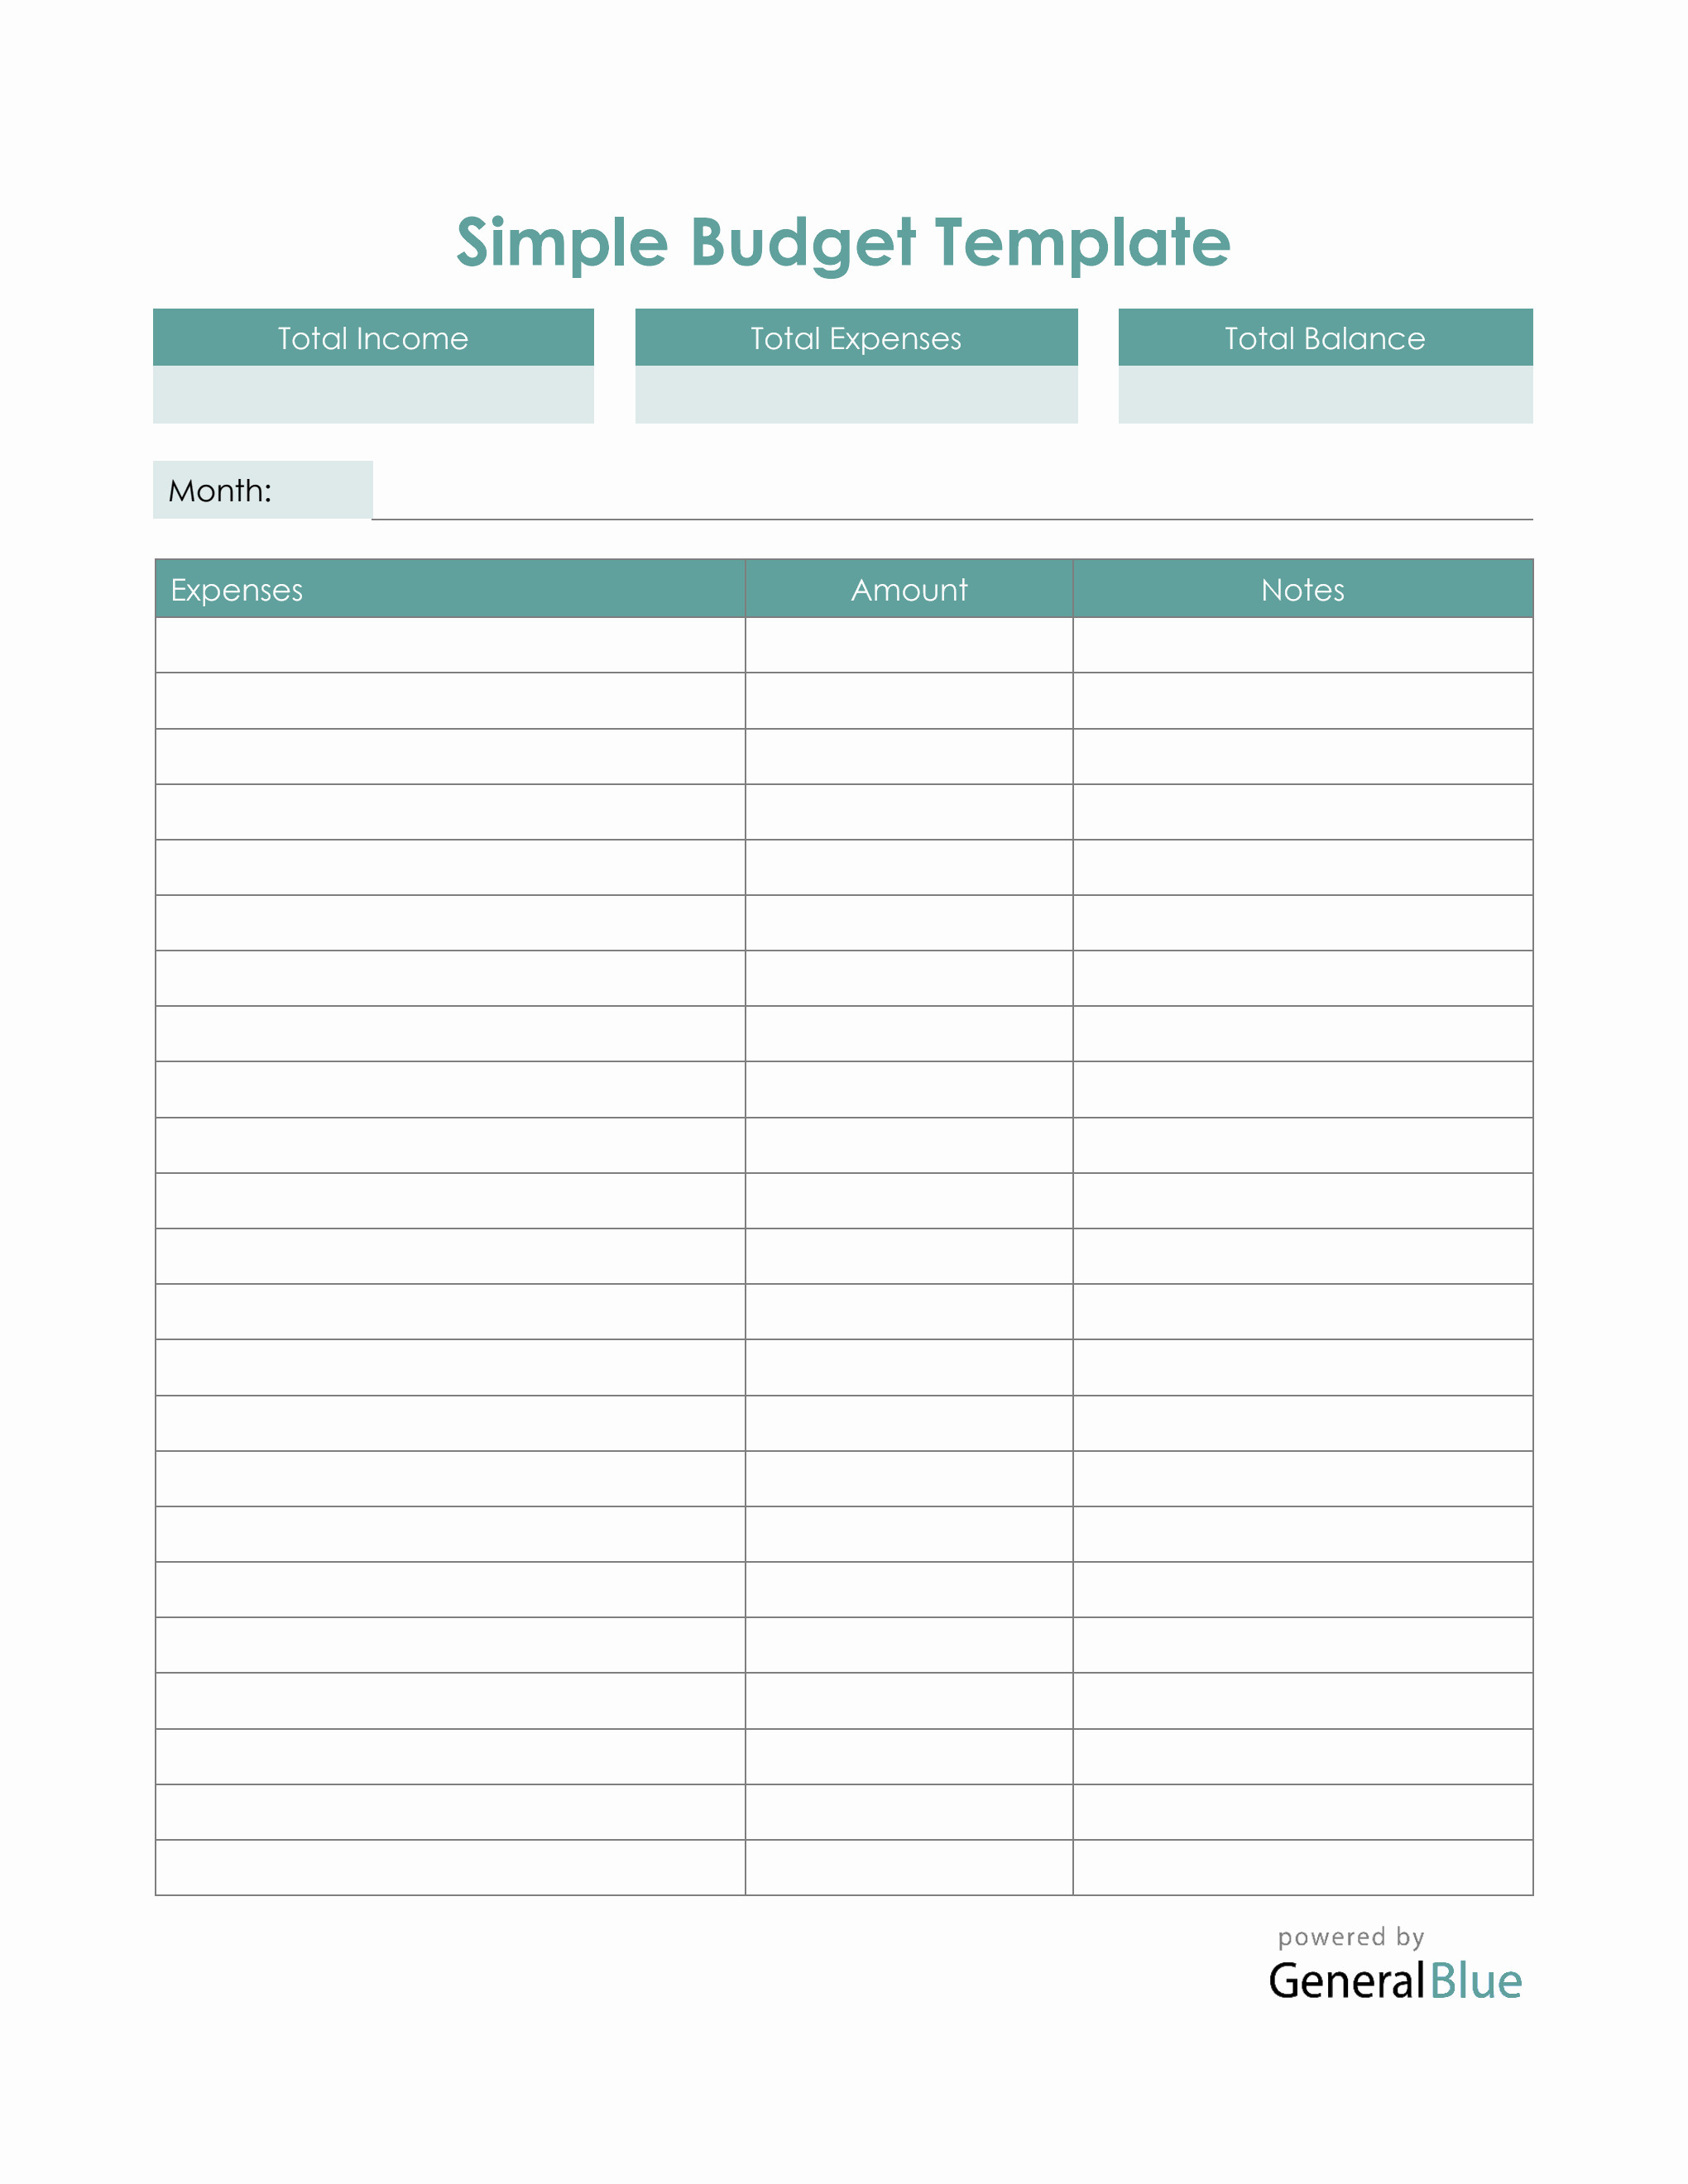 Budget Planner in Word - FREE Template Download